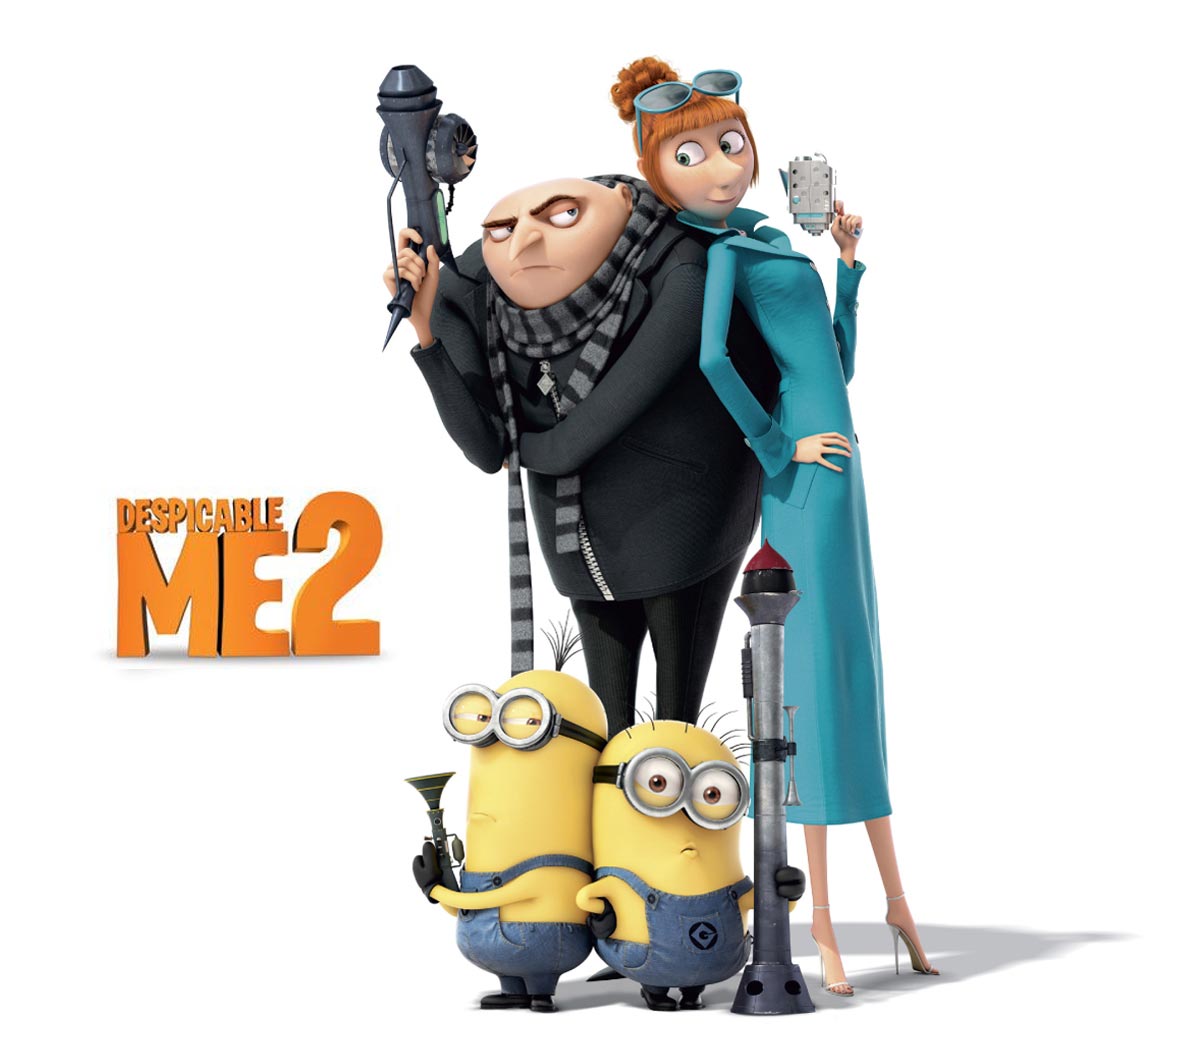 HQ Despicable Me Wallpapers | File 93.07Kb